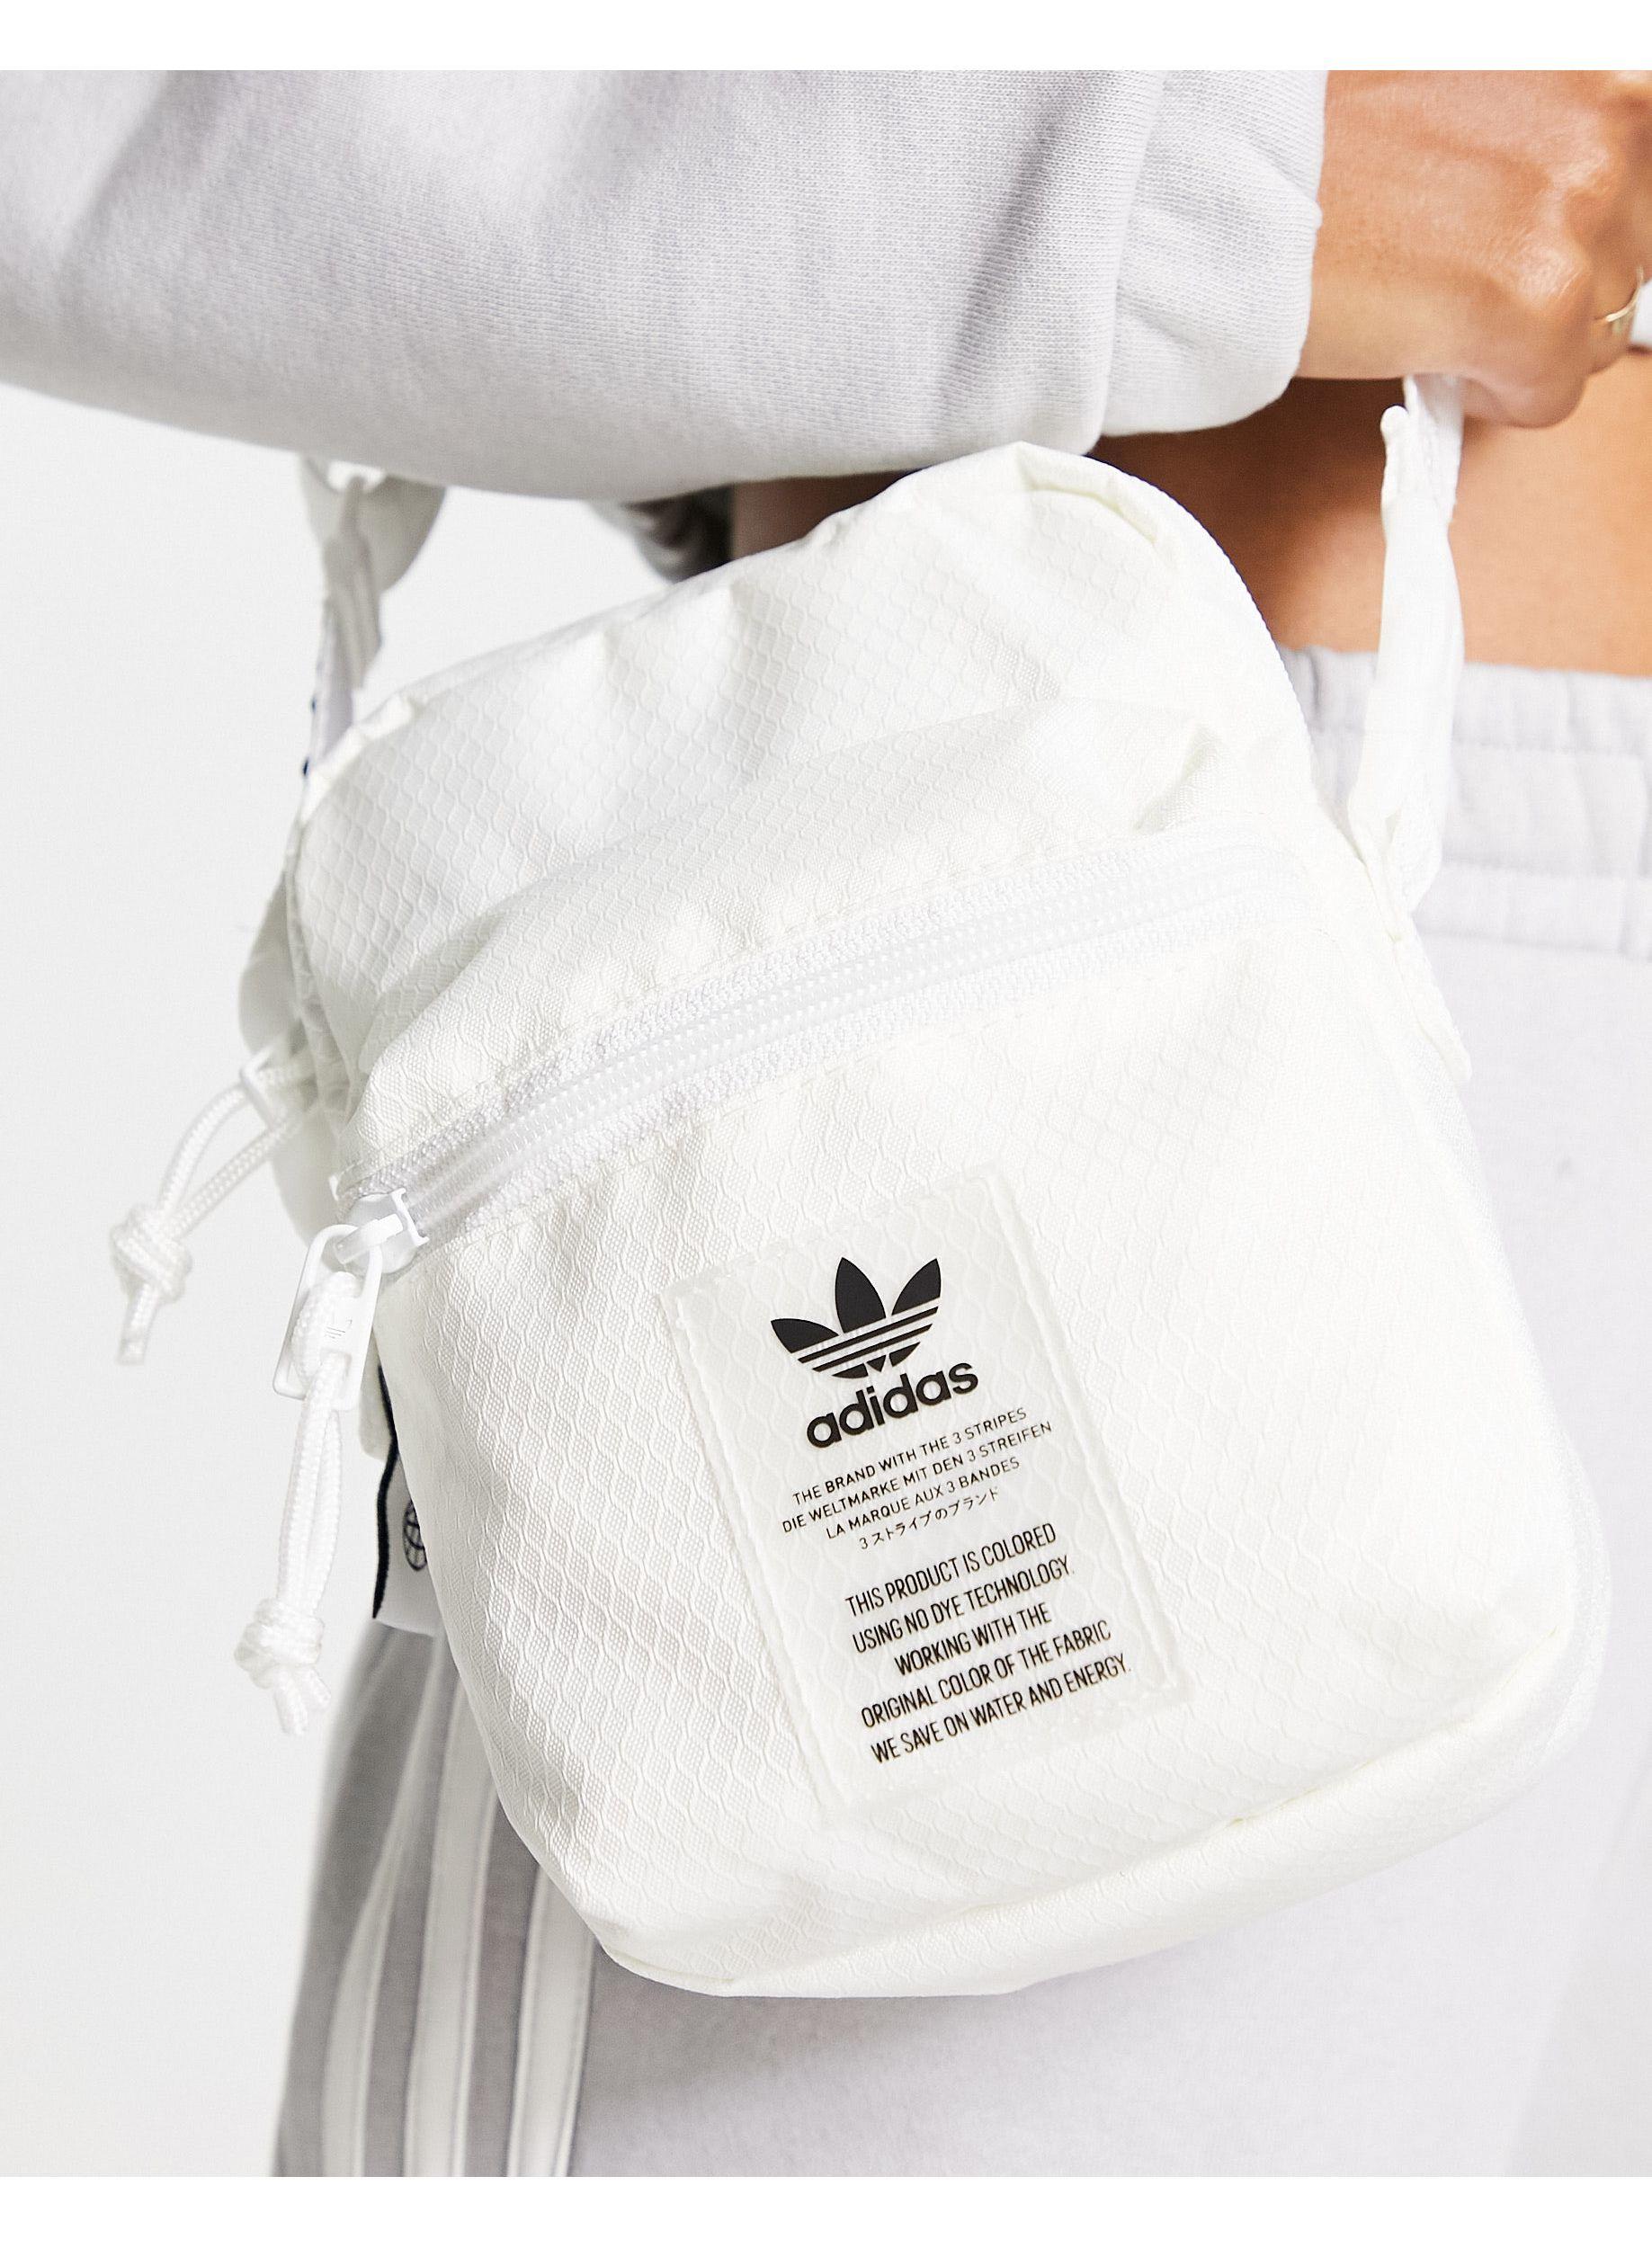 adidas Originals Non Dyed Festival Crossbody Bag in White | Lyst